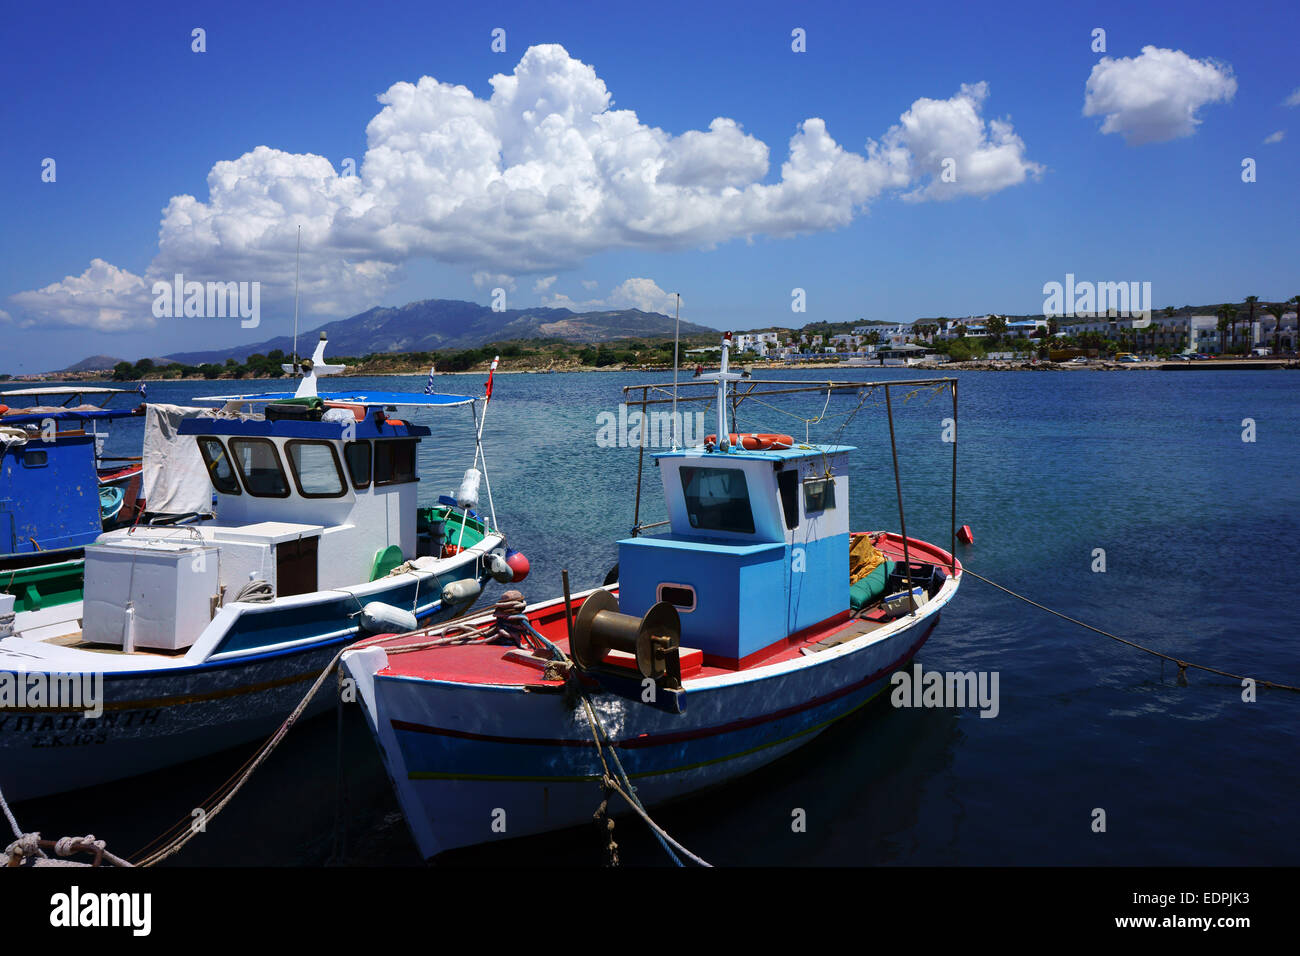 Town Mastichari seen from harbour with fishing boats, Island Kos, Greece Stock Photo